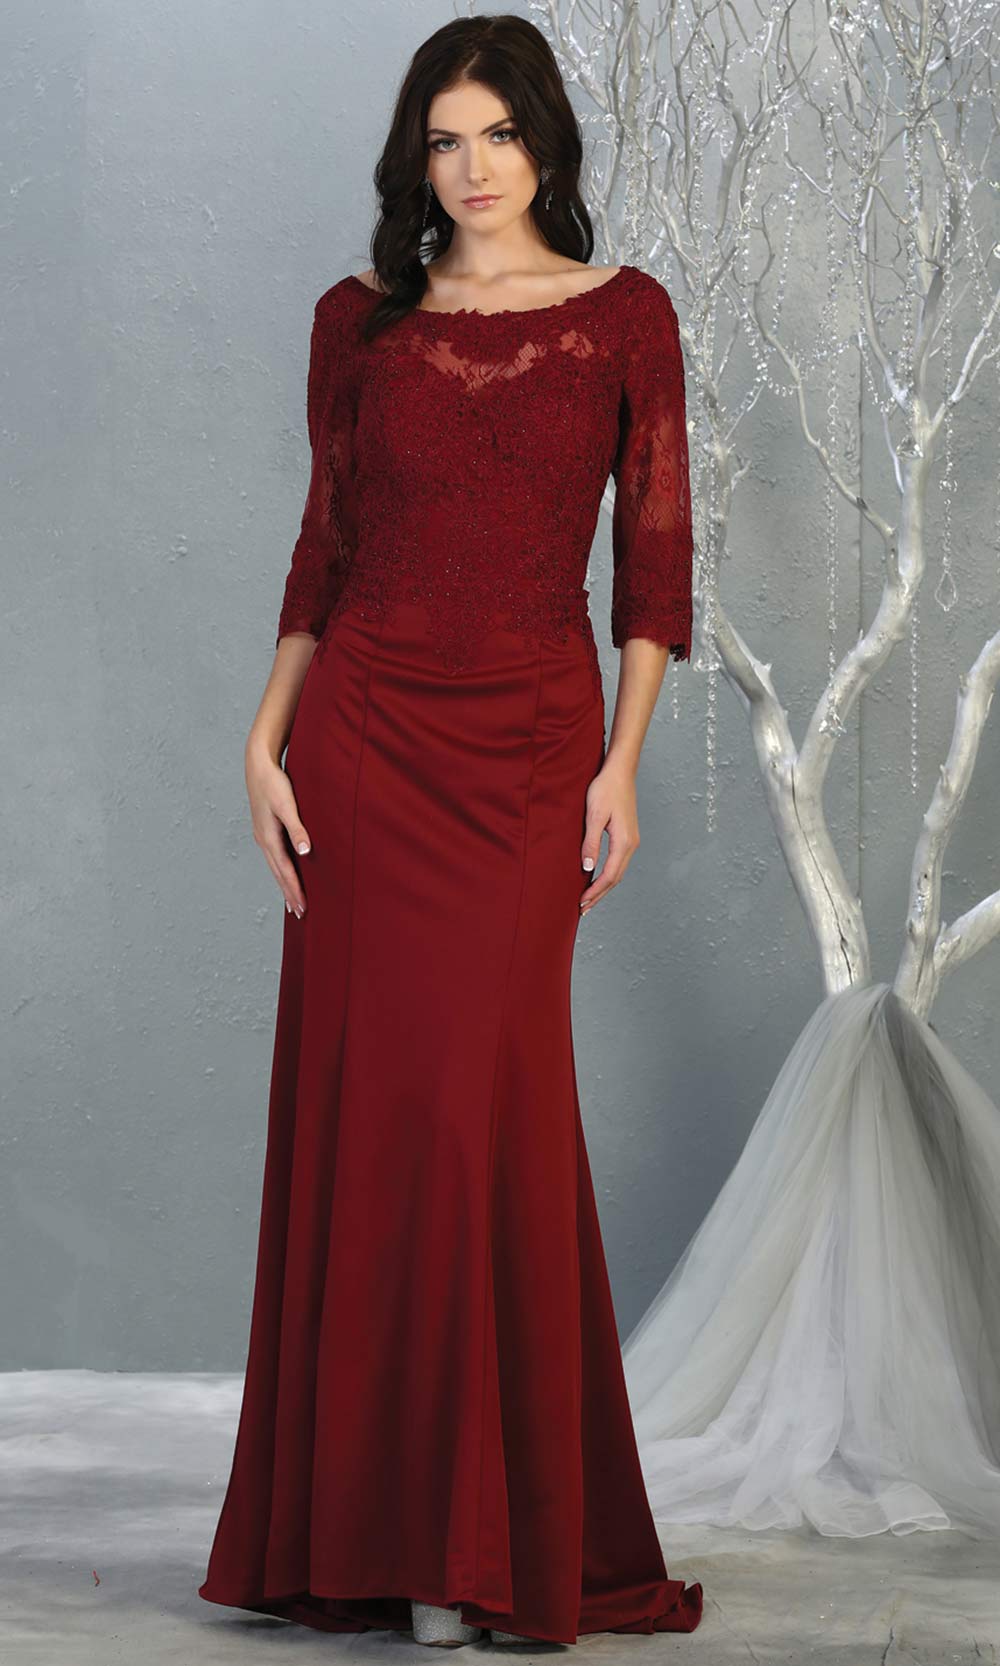 Mayqueen MQ1810 long burgundy red modest flowy dress w/ long sleeves. Dark red chiffon & lace top is perfect for  mother of the bride, formal wedding guest, indowestern gown, evening party dress, dark red muslim party dress. Plus sizes avail.jpg